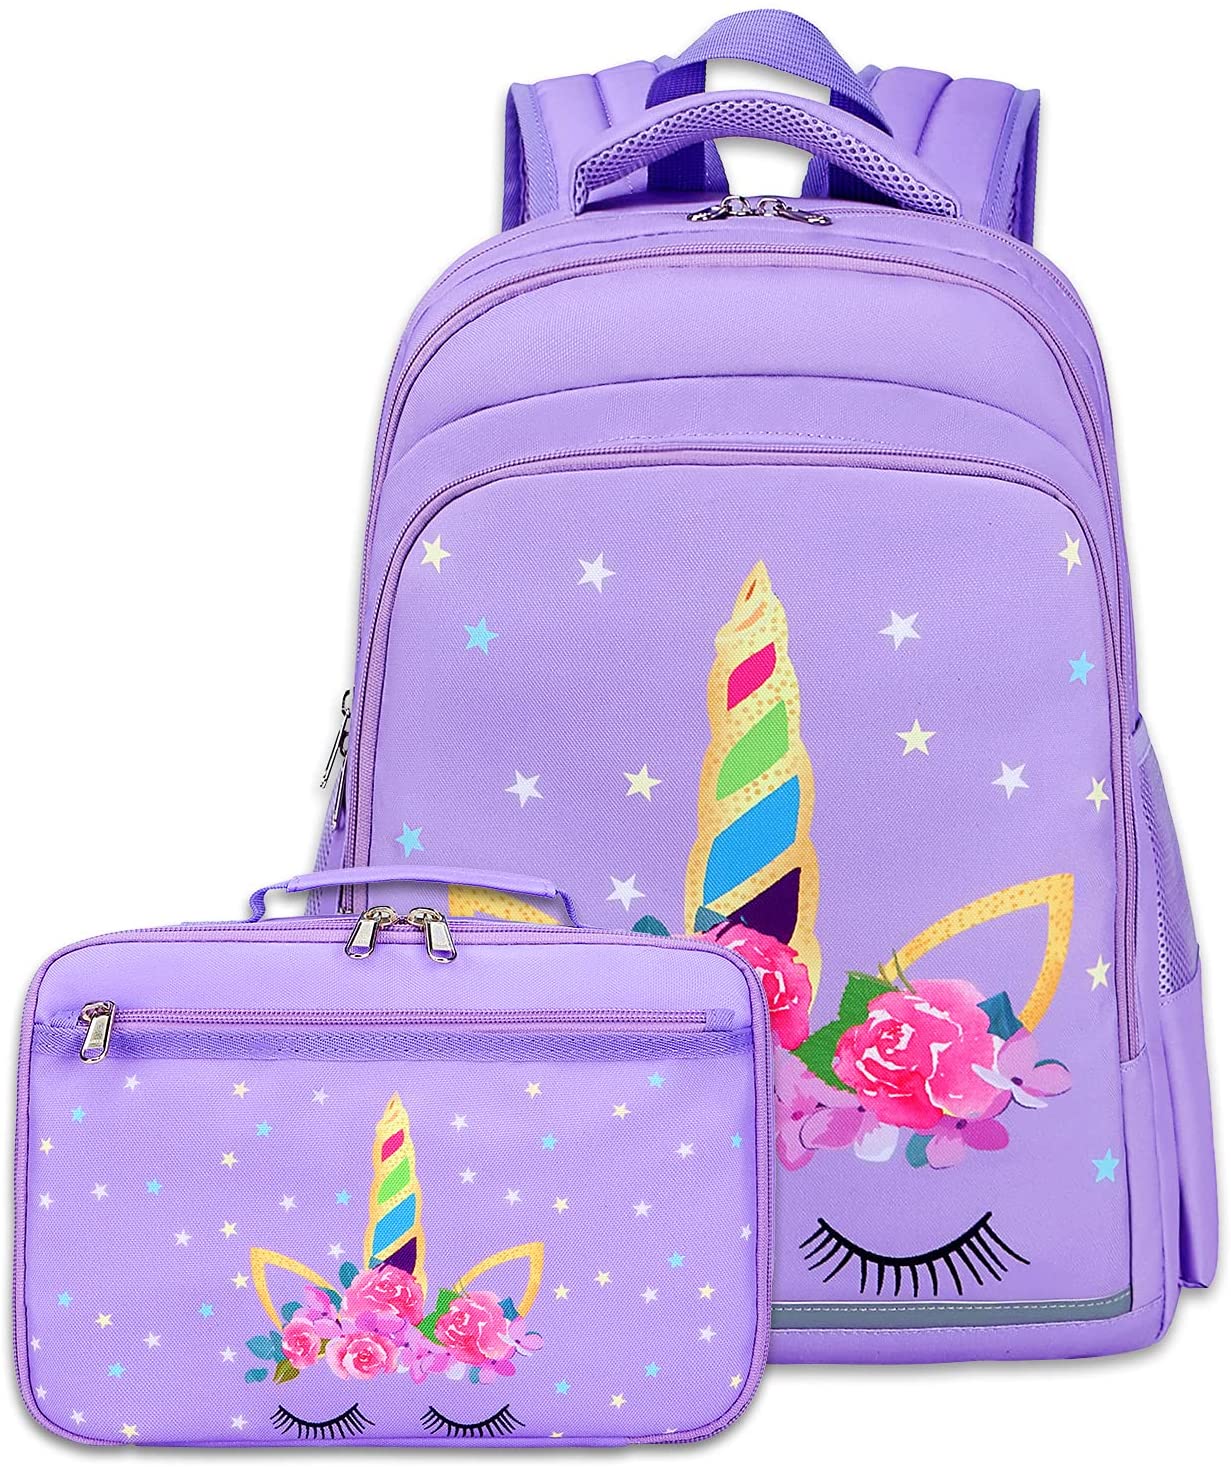 Camtop Unicorn backpack with matching lunch box